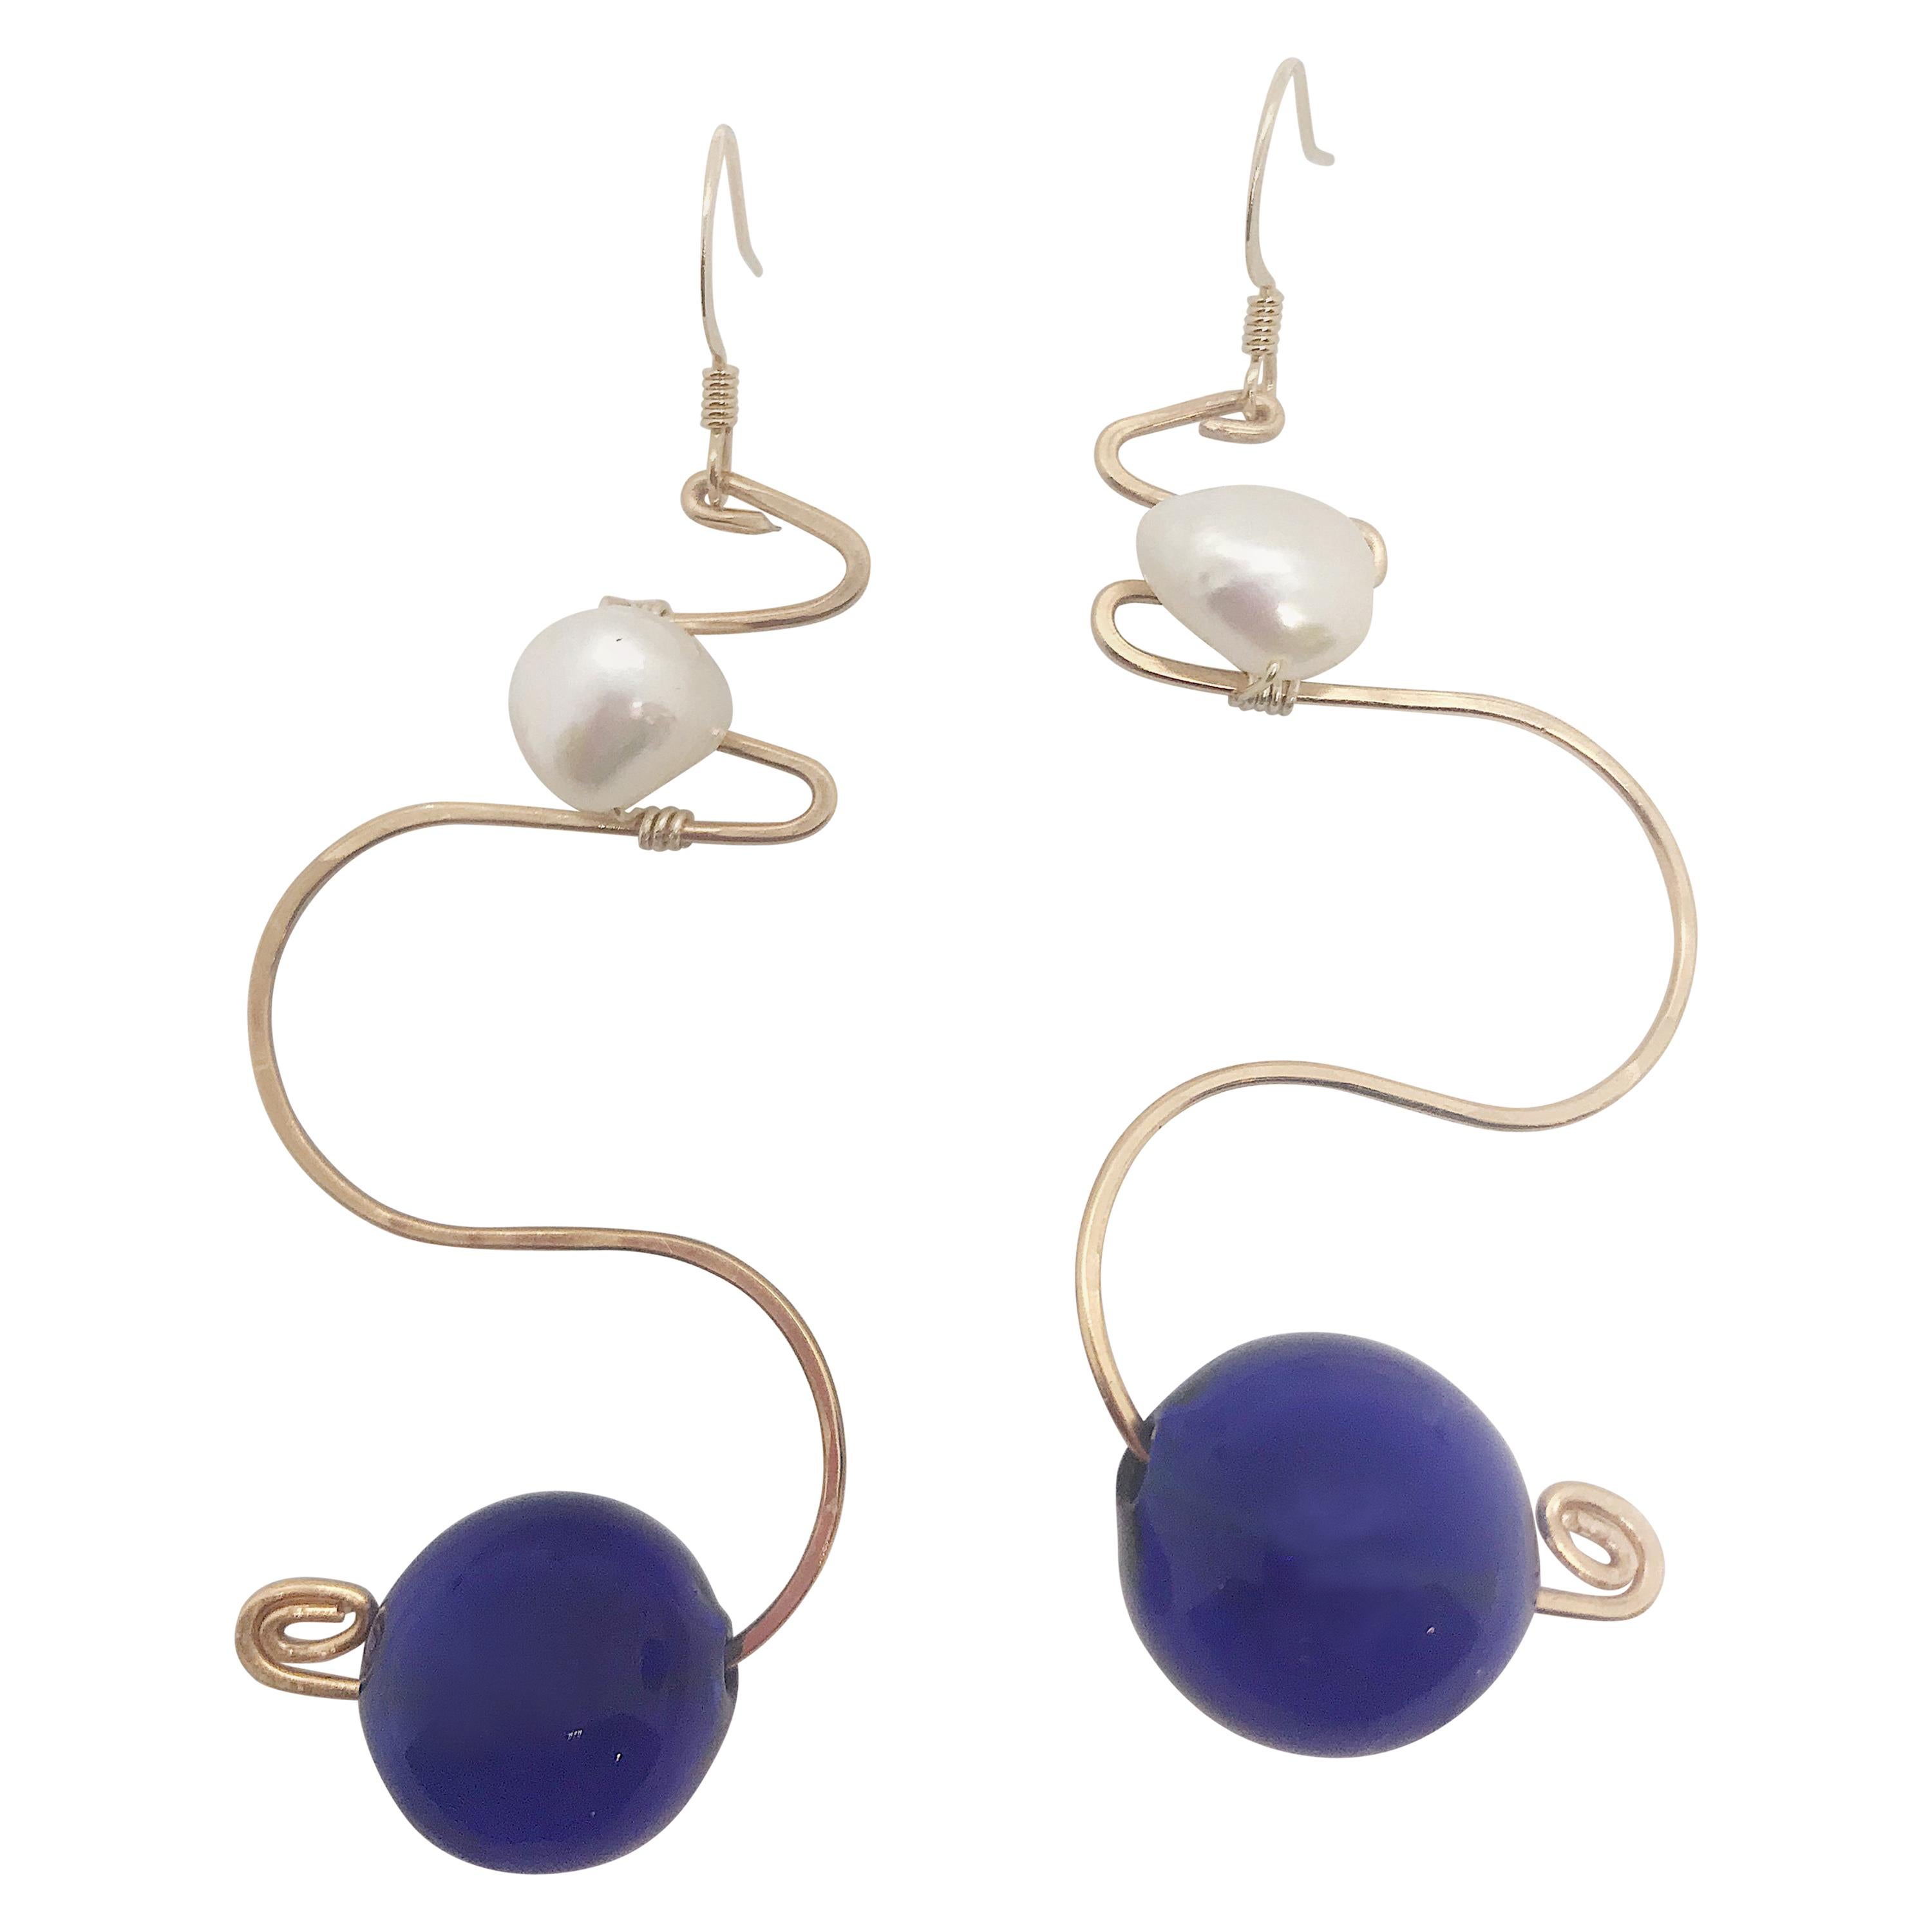 Royal Earrings with glass and freshwater pearl by Sidney Cherie Studio For Sale